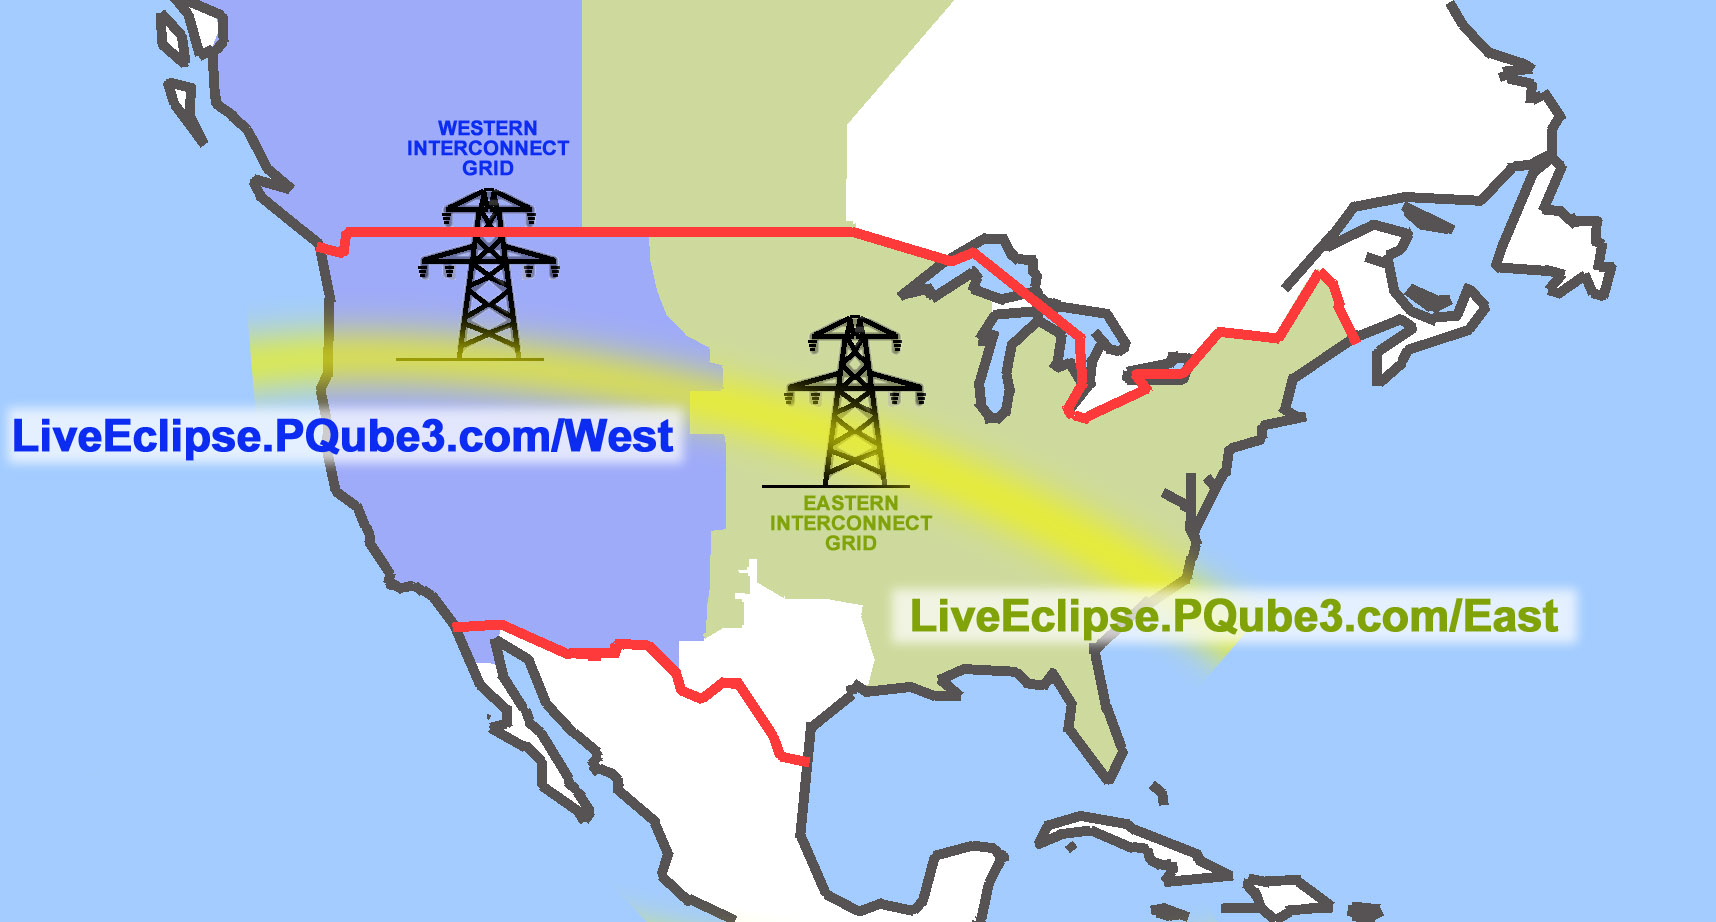 Power Standards Lab to Observe Effects of North America's Electric Power Grids Response to the 2017 Eclipse, Live